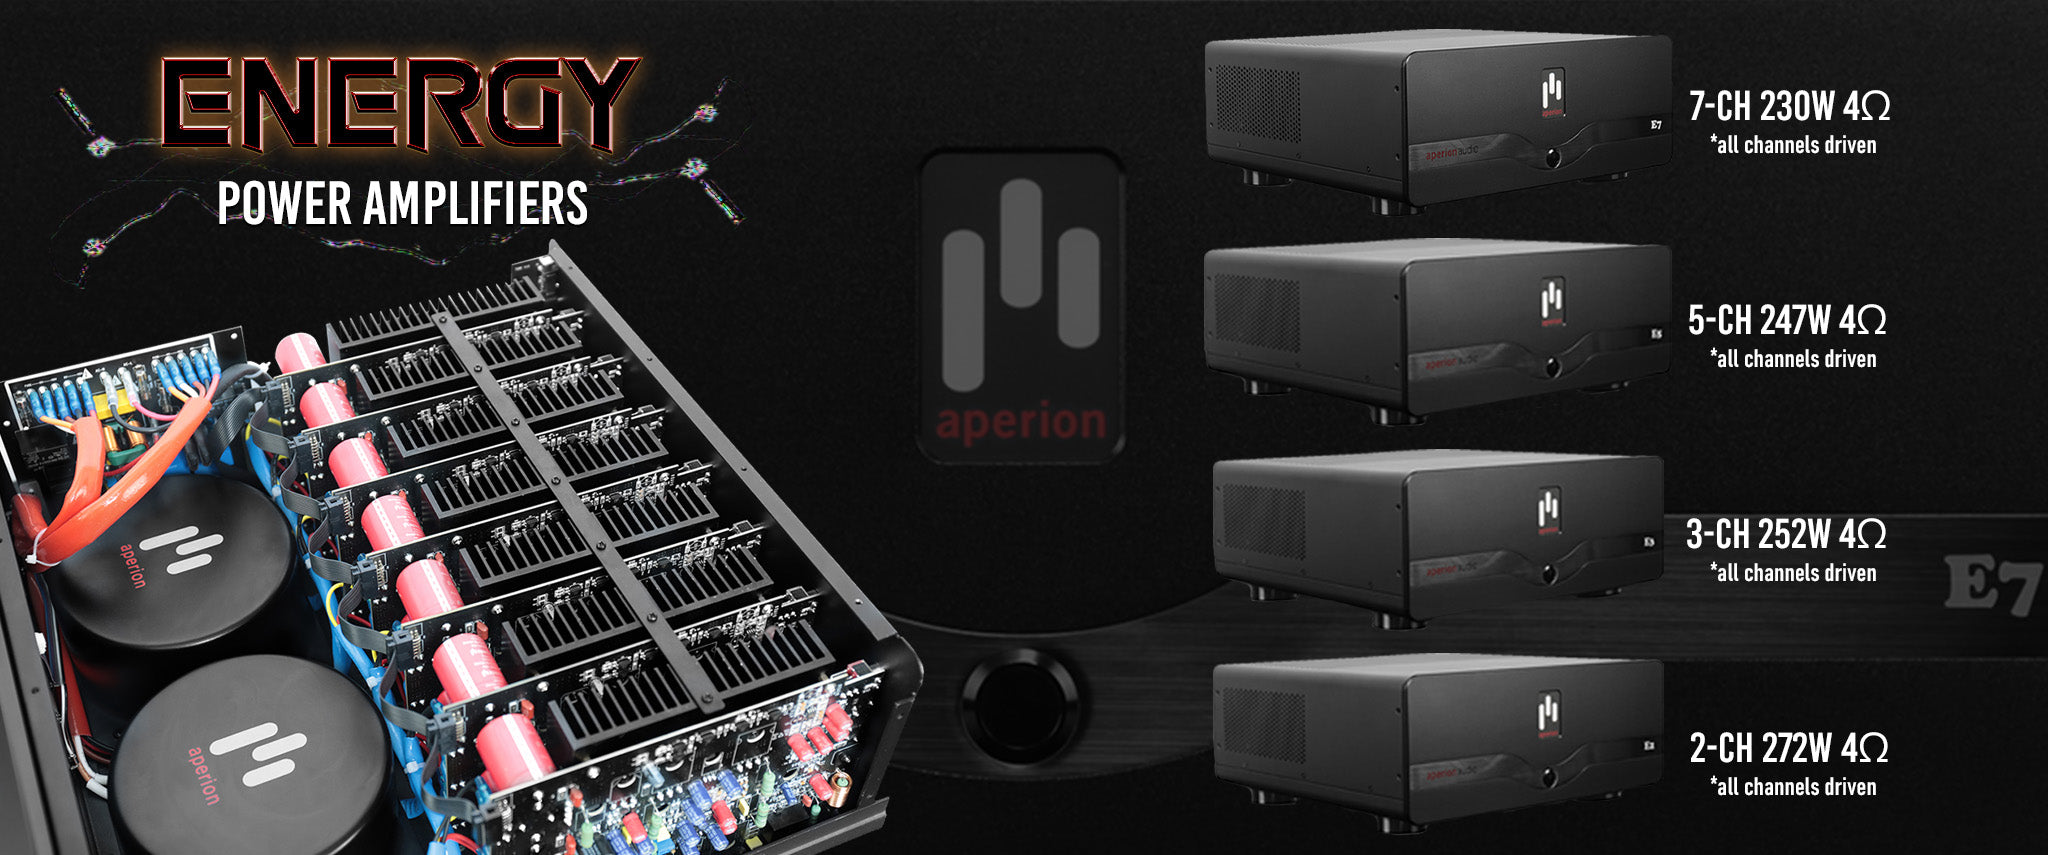 heden Bezit Wens Aperion Audio | Best Home Theater Surround Sound Stereo Speaker System